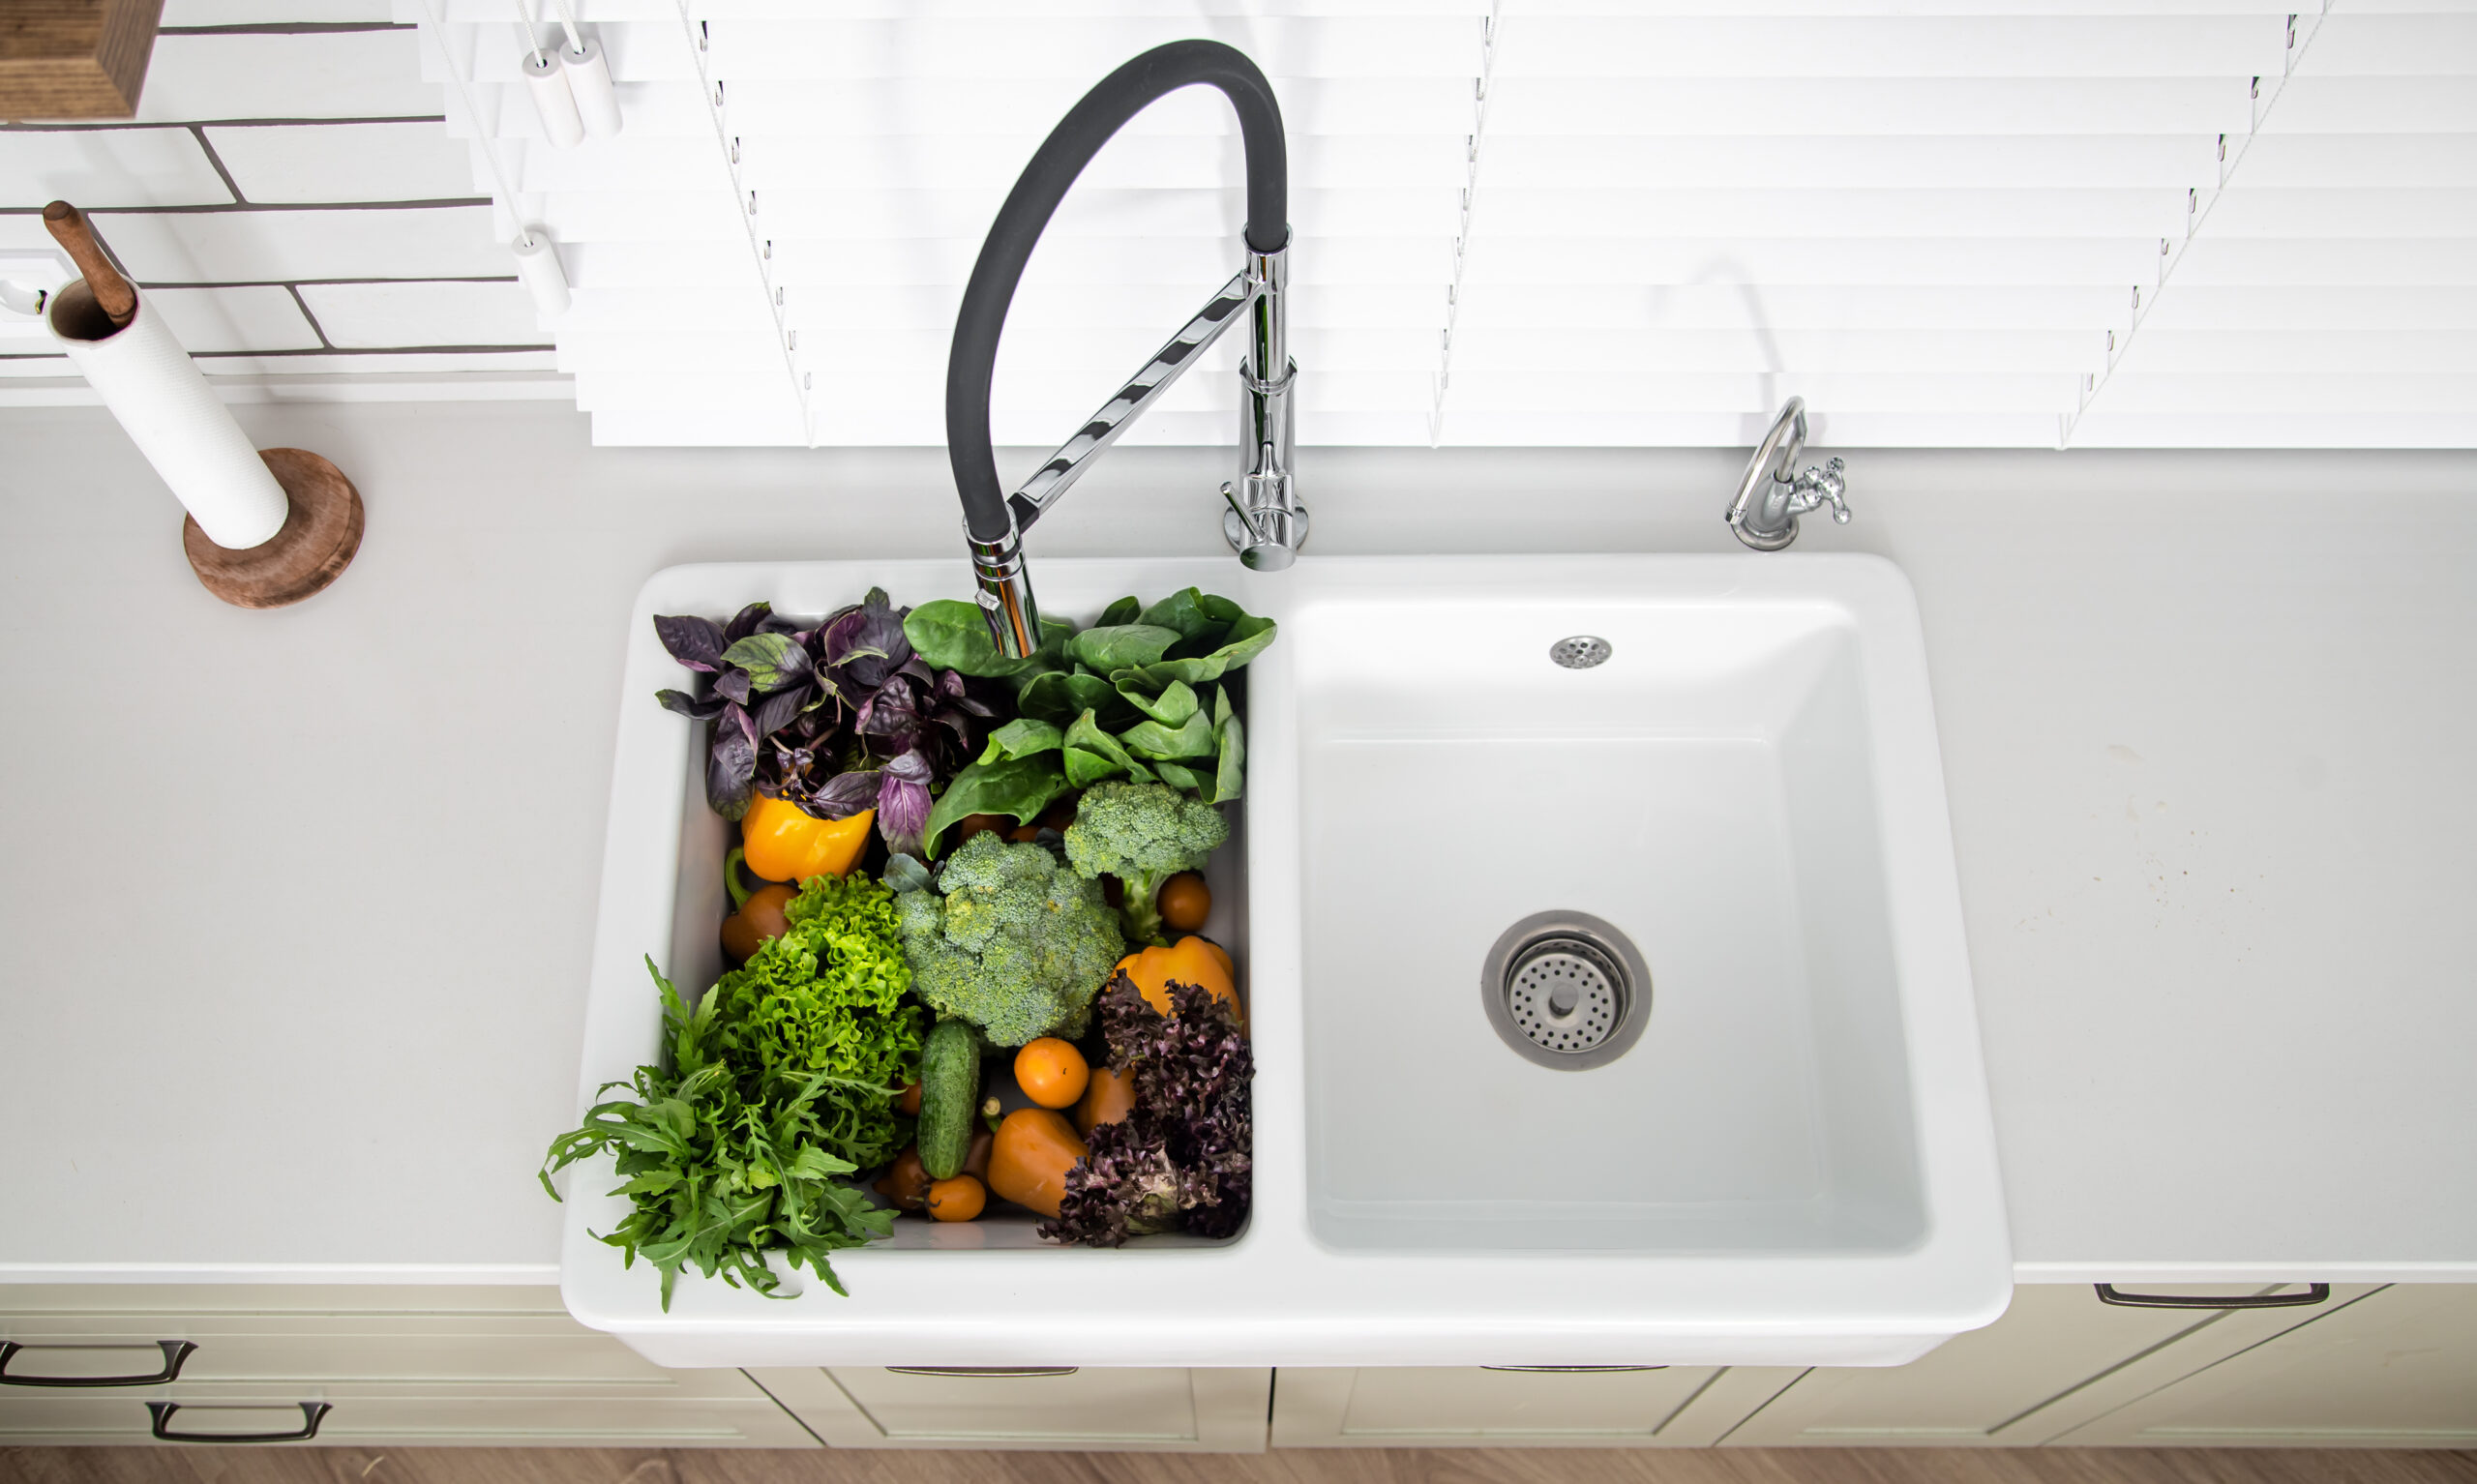 7 Tips to Remove Rust from Kitchen Sink https://techpro.tech/